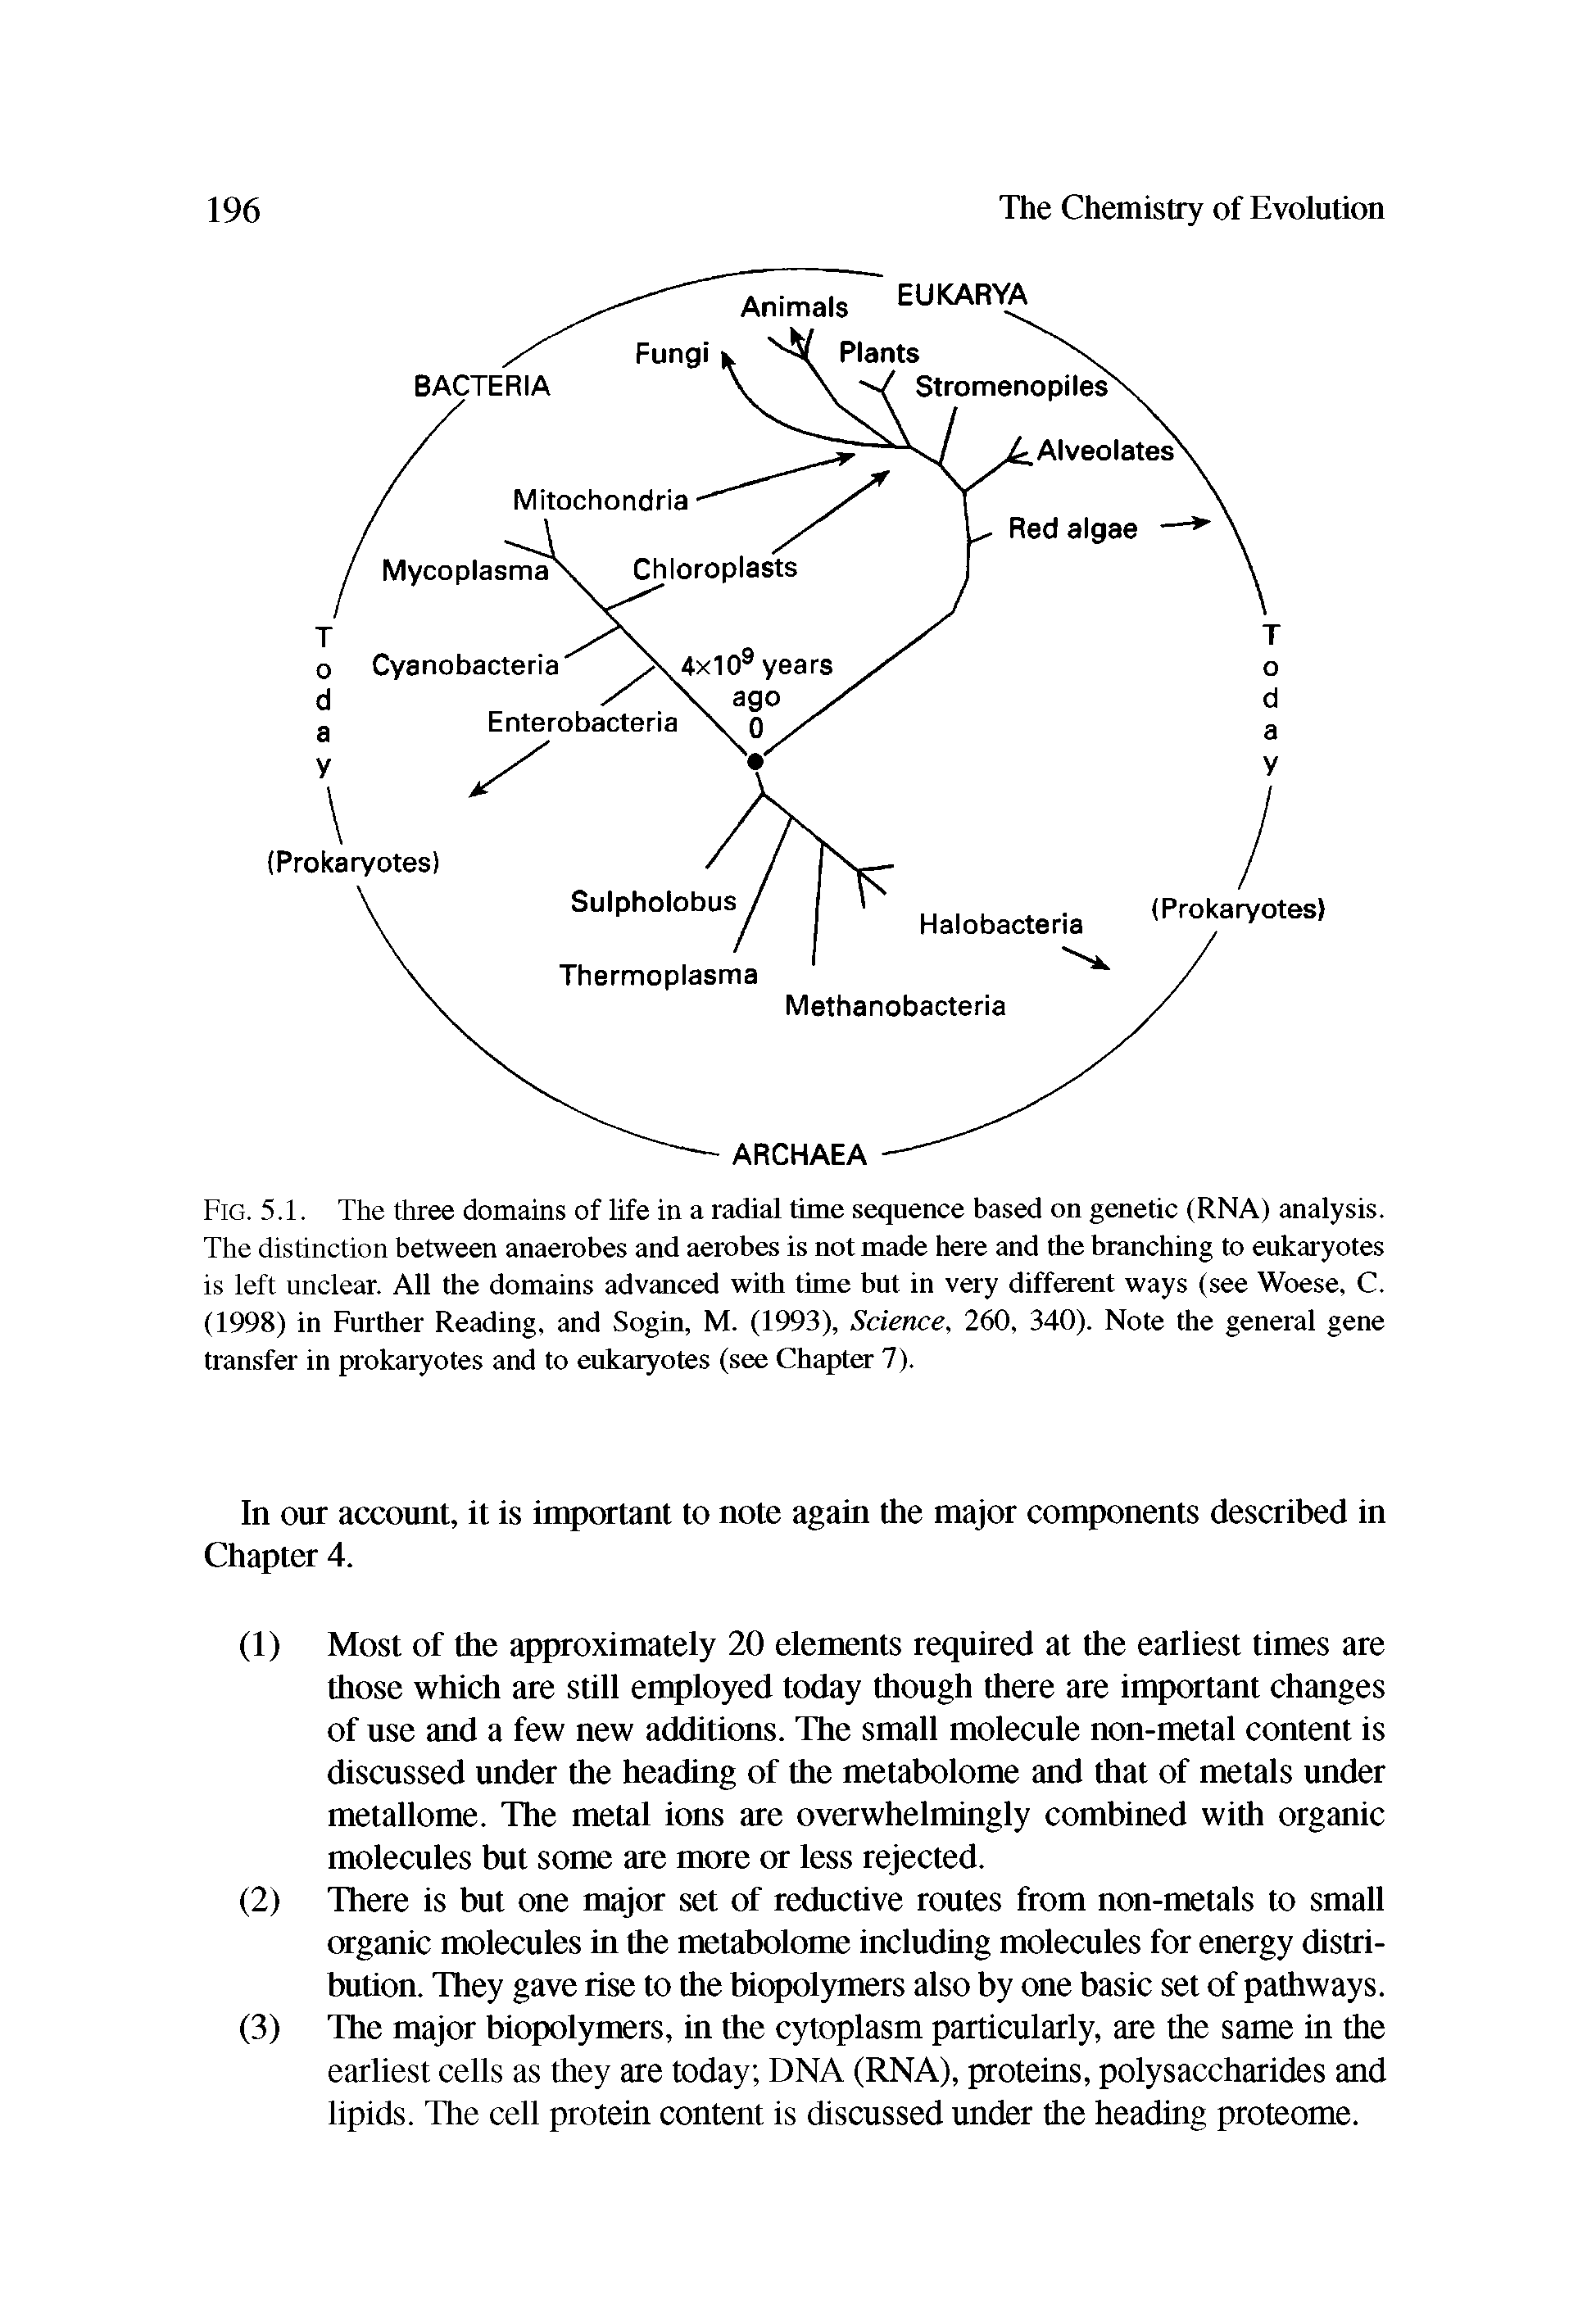 Fig. 5.1. The three domains of life in a radial time sequence based on genetic (RNA) analysis. The distinction between anaerobes and aerobes is not made here and the branching to eukaryotes is left unclear. All the domains advanced with time but in very different ways (see Woese, C. (1998) in Further Reading, and Sogin, M. (1993), Science, 260, 340). Note the general gene transfer in prokaryotes and to eukaryotes (see Chapter 7).